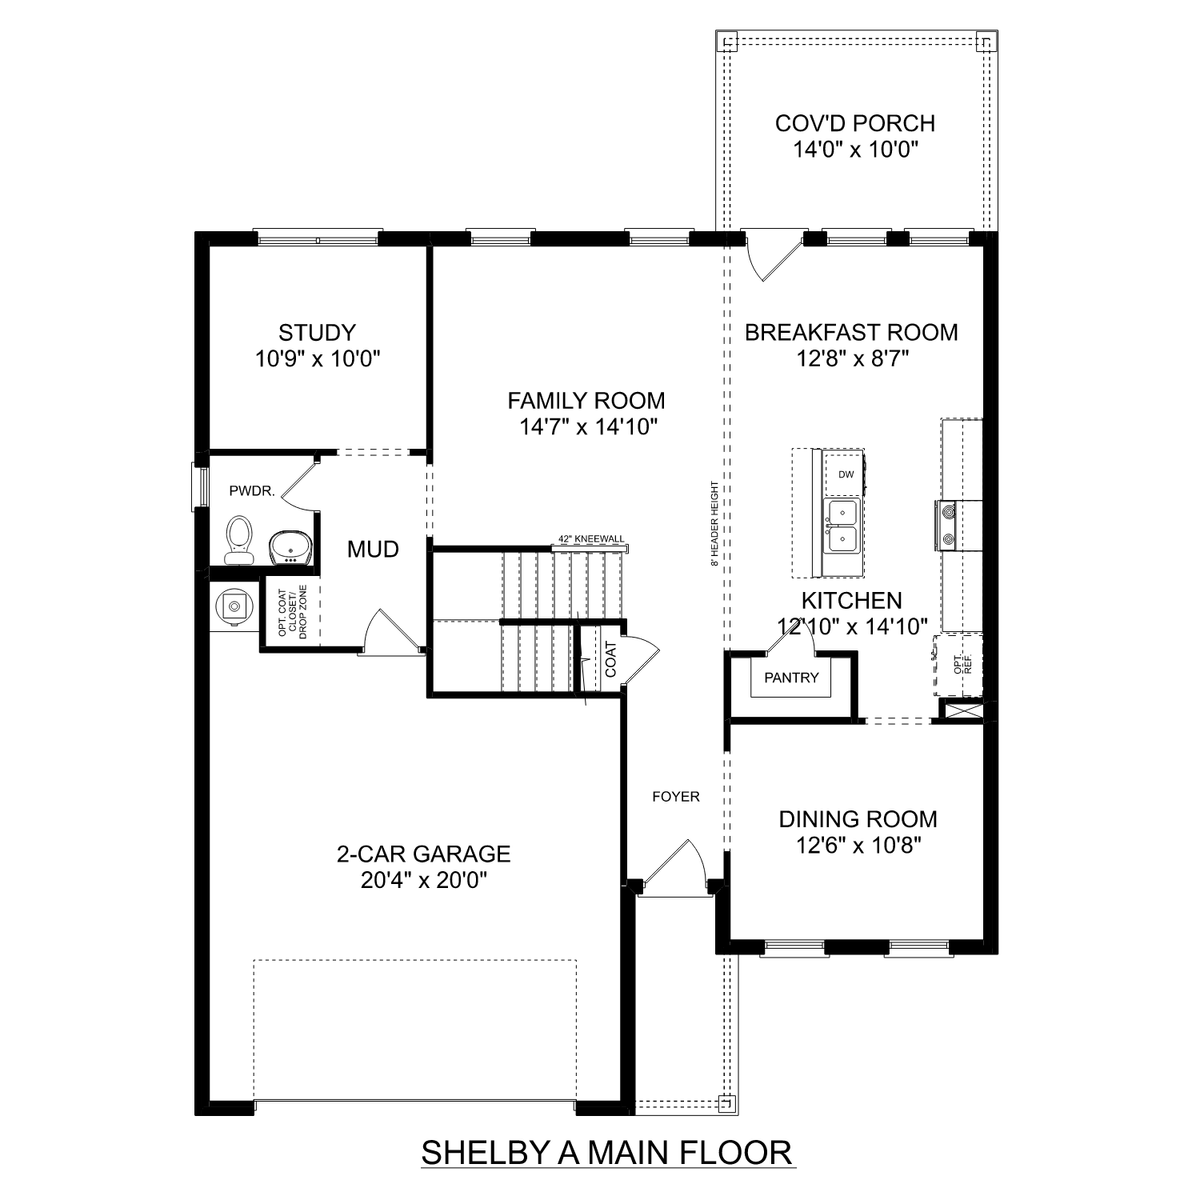 1 - The Shelby A buildable floor plan layout in Davidson Homes' Heritage Lakes community.